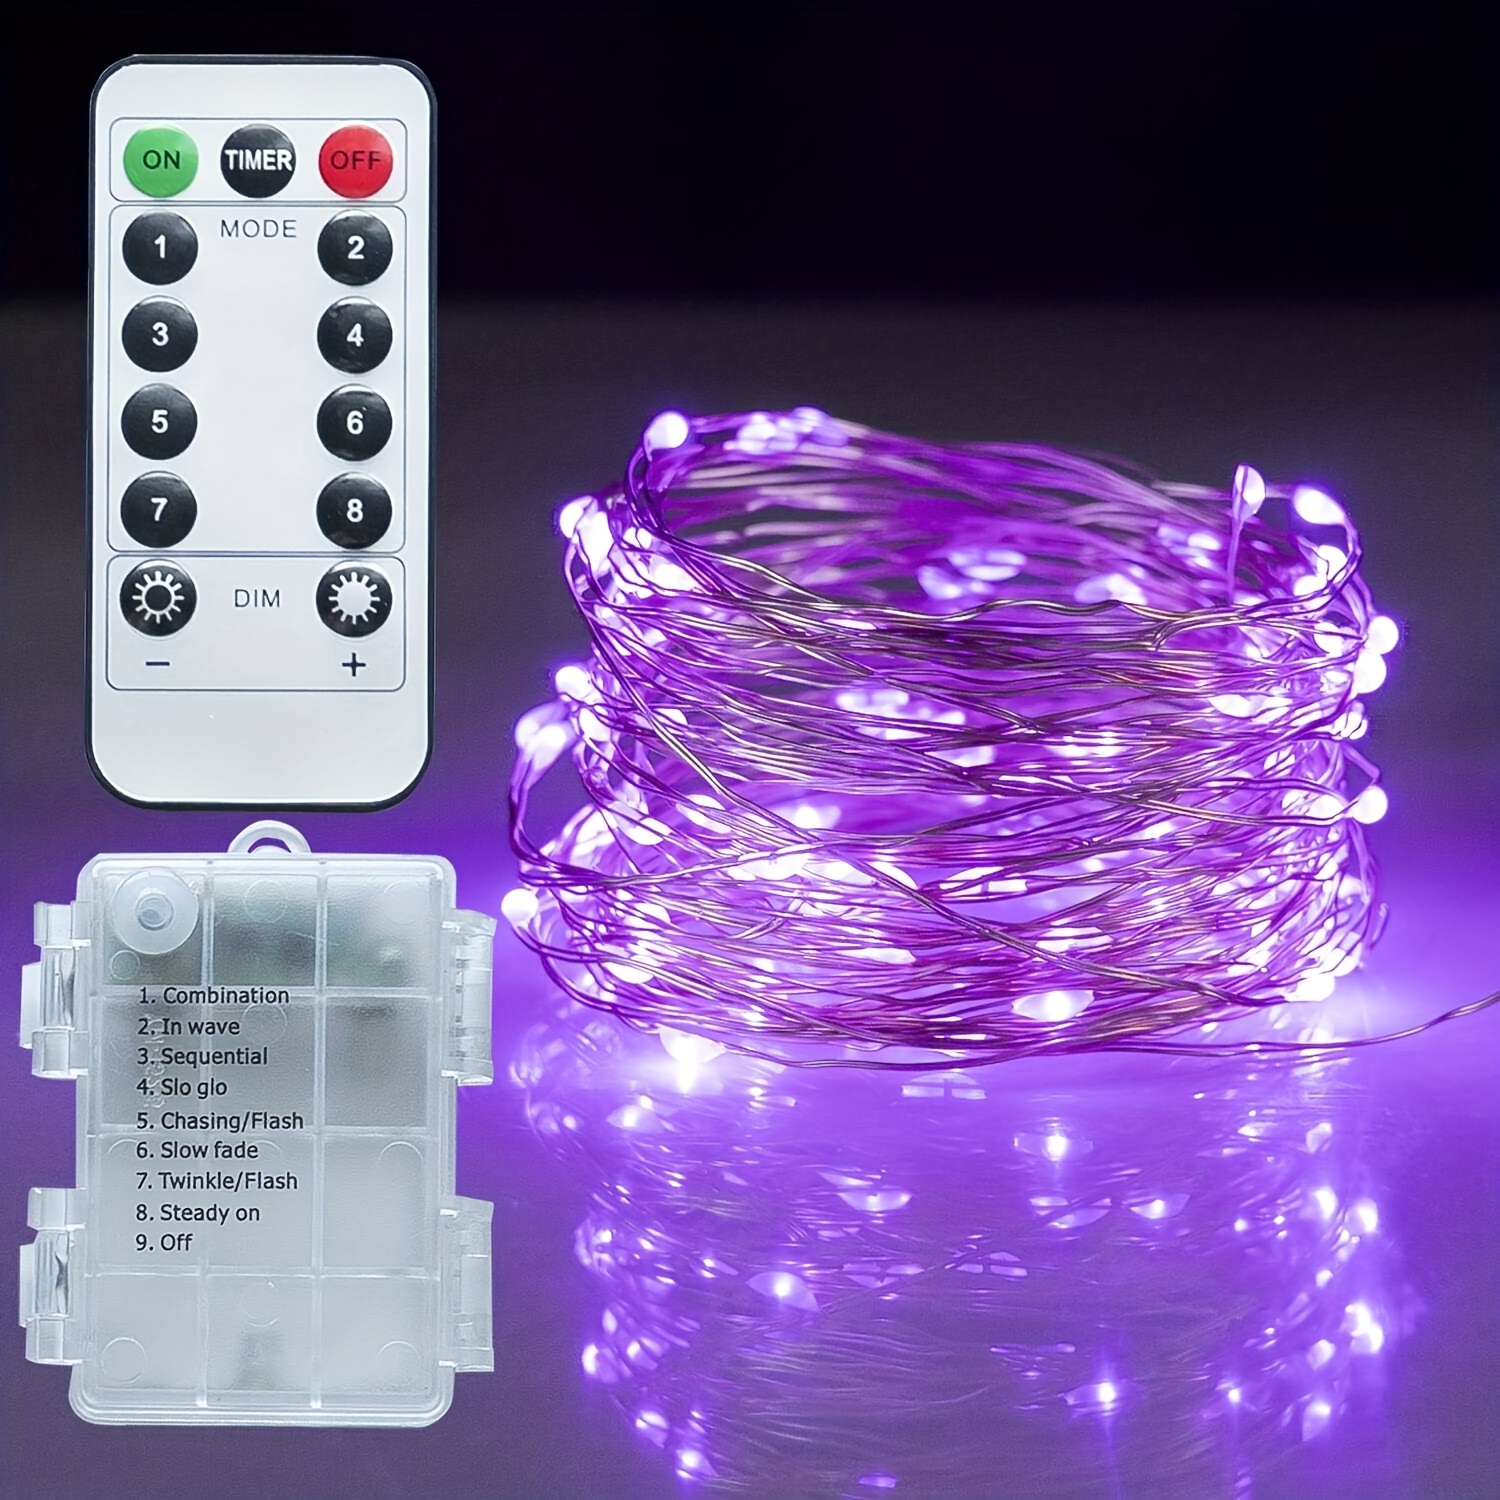 USB Fairy Lights With Remote Control, LED String Lights, Twinkle Lights,  USB Plug With Timer, 8 Twinkle Modes, Pink, Purple, 16ft, 33ft 